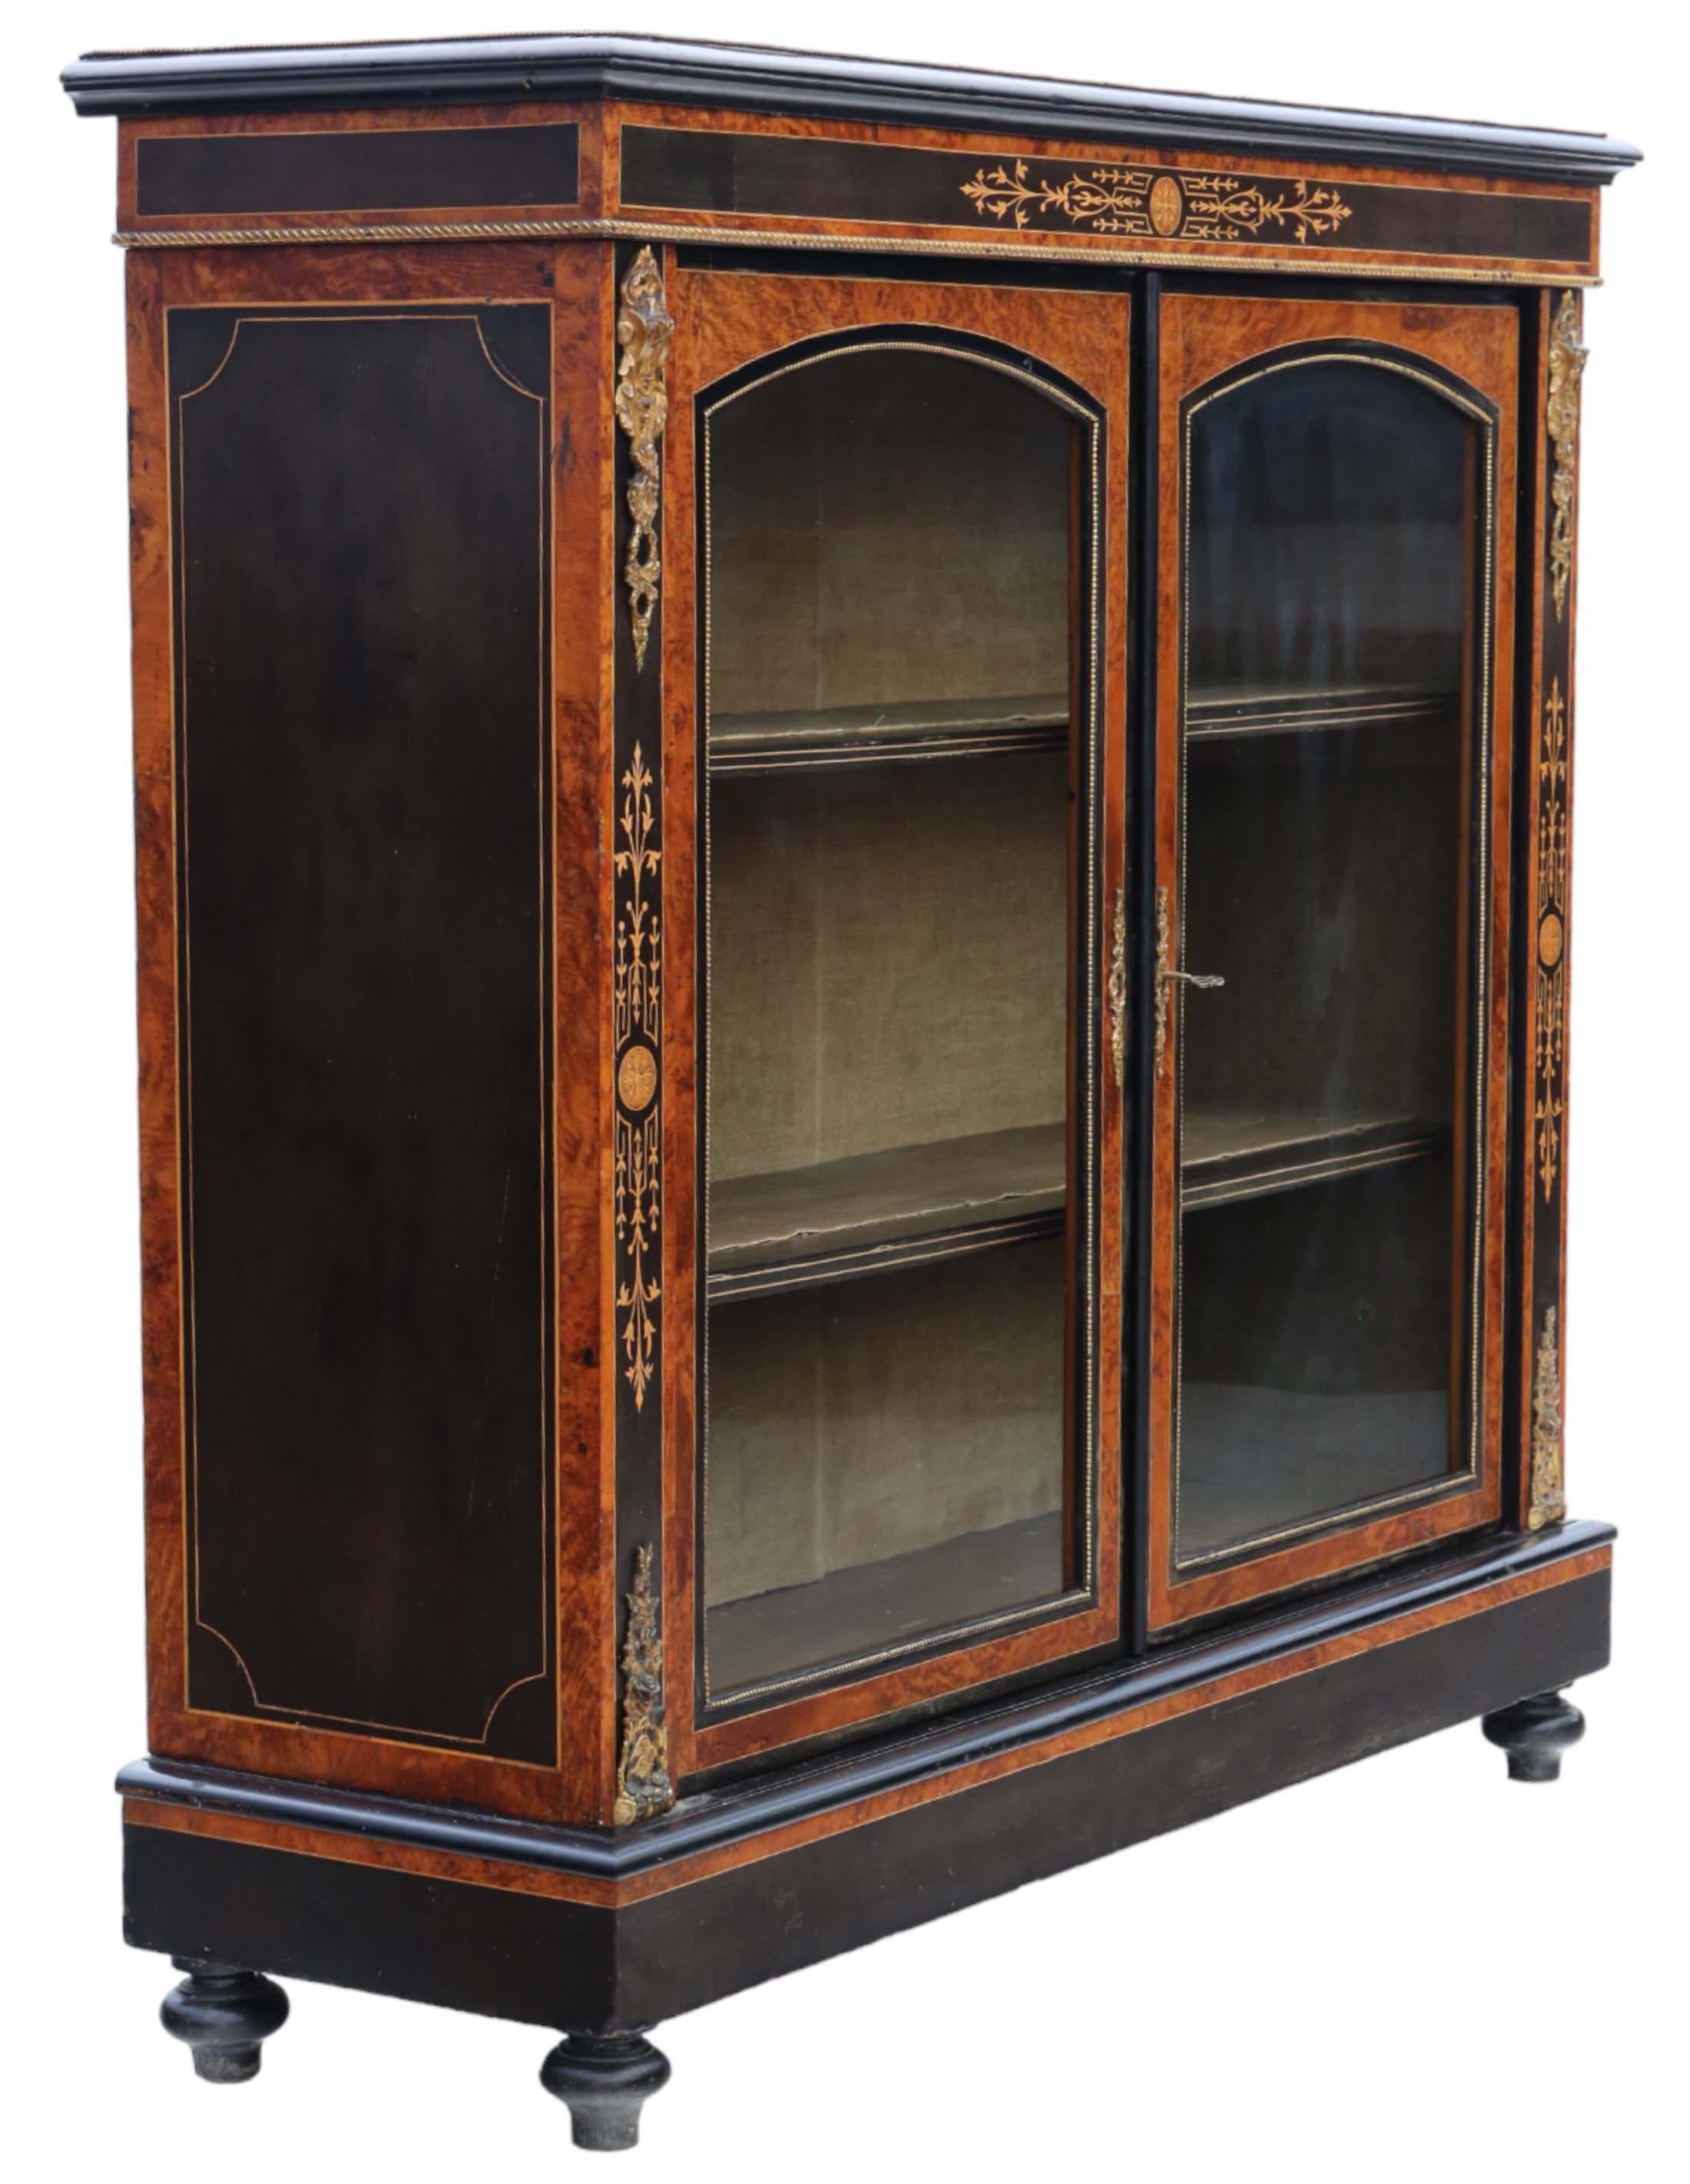 Antique C1880 large quality inlaid burr walnut display cabinet For Sale 1